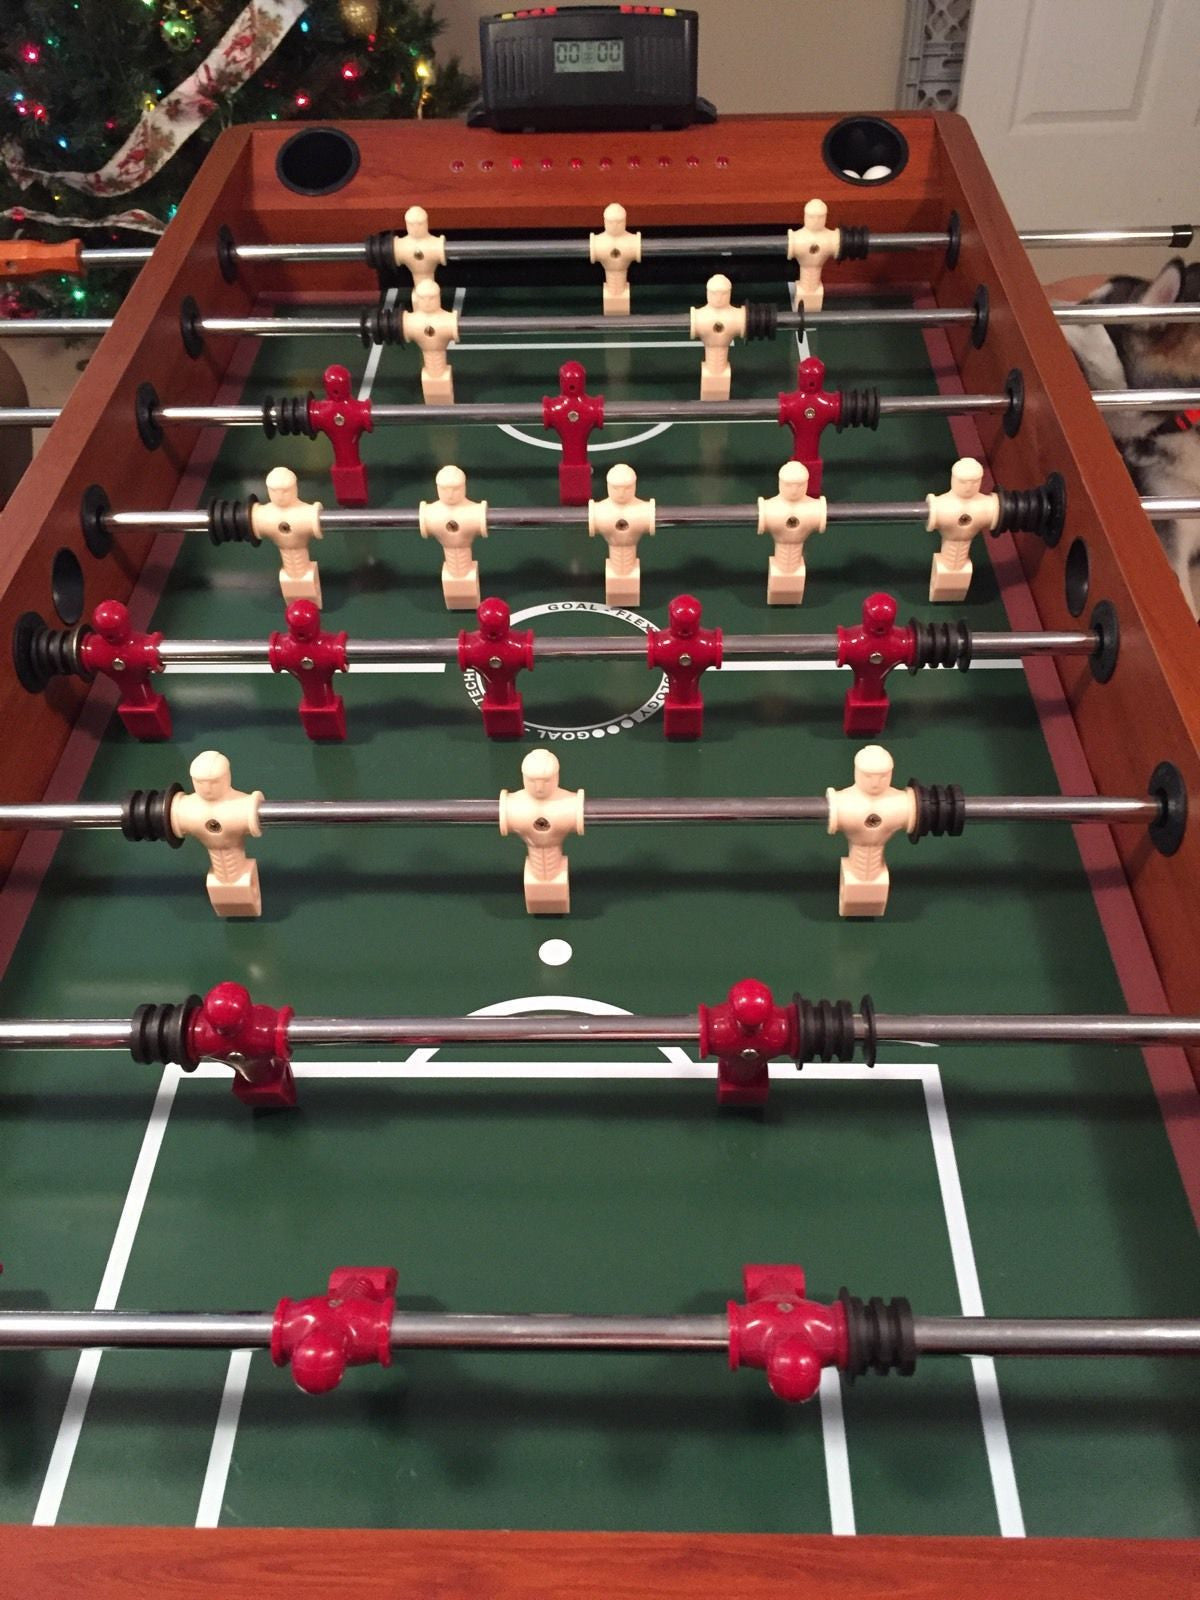 Playing Field on DMI Sports Foosball Table with Goal Flex called American Legend Advantage 56" which is available at Foosball Planet